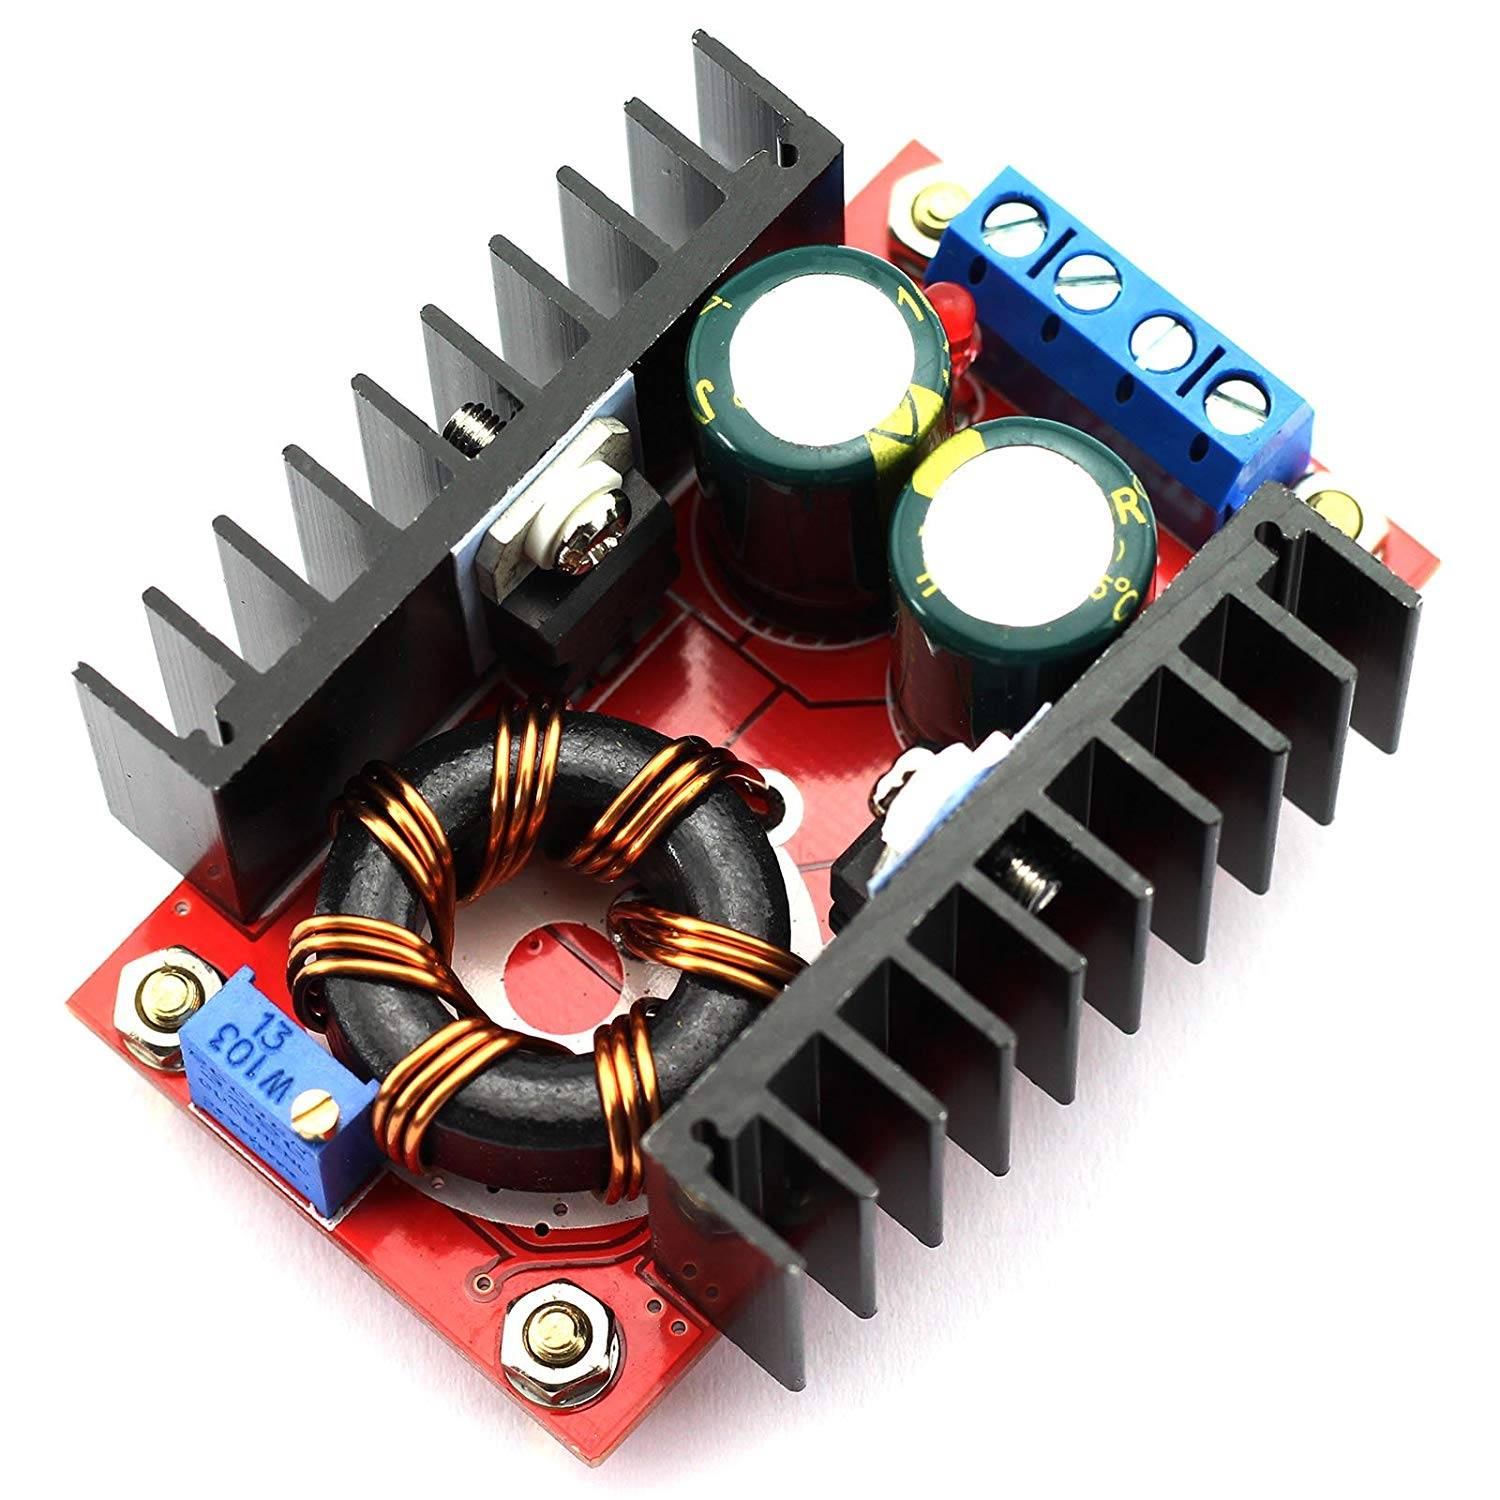 2pcs 150w DC Boost Converter 10-32v to 12-35v 6a Step up Power Supply Module ELH for sale online